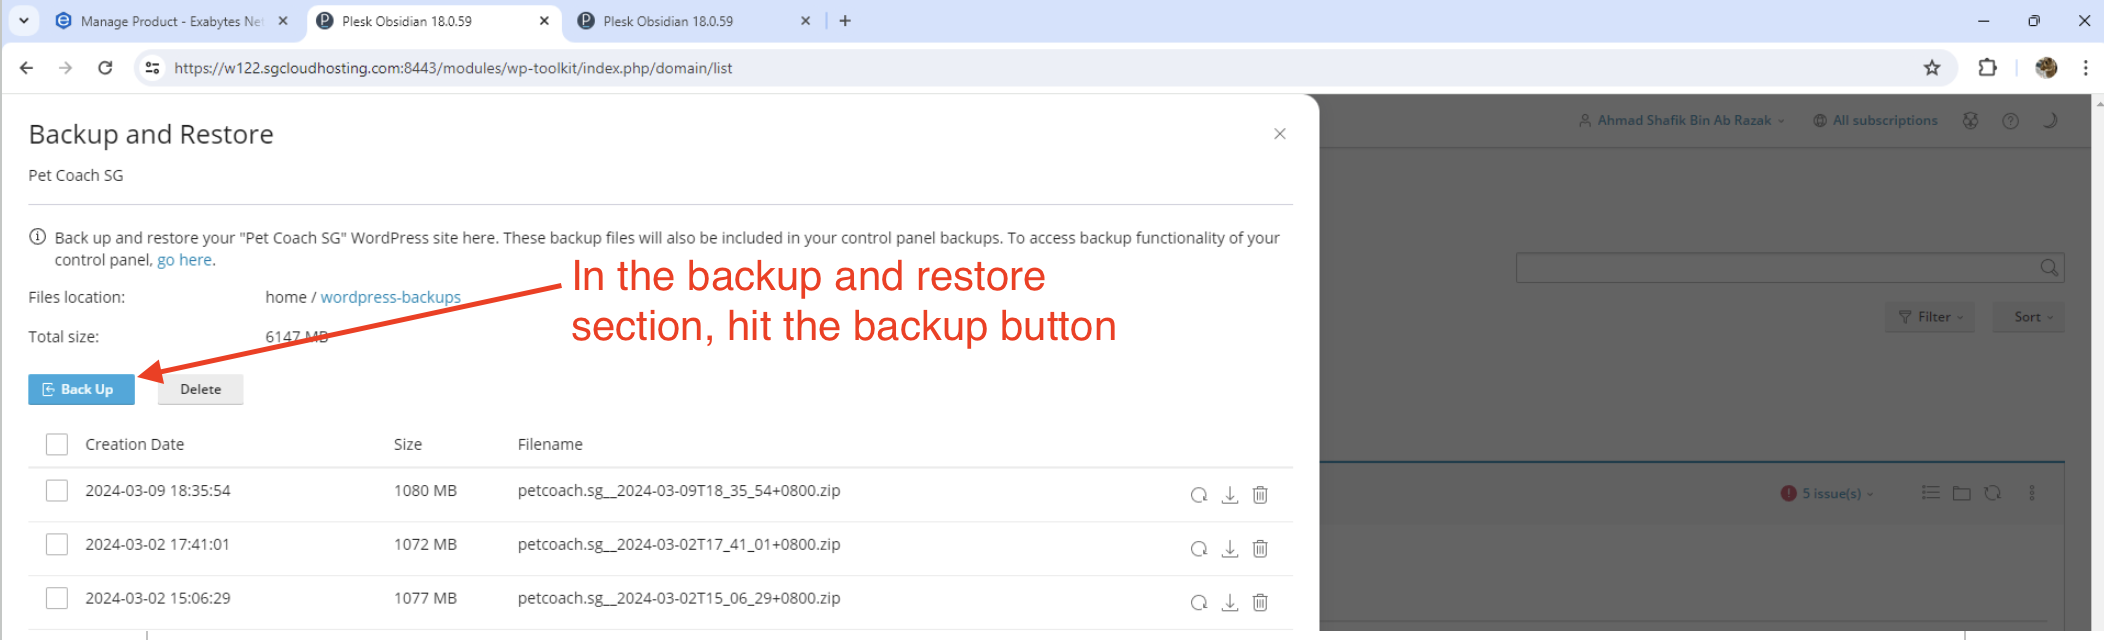 image of the Plesk backup and restore section